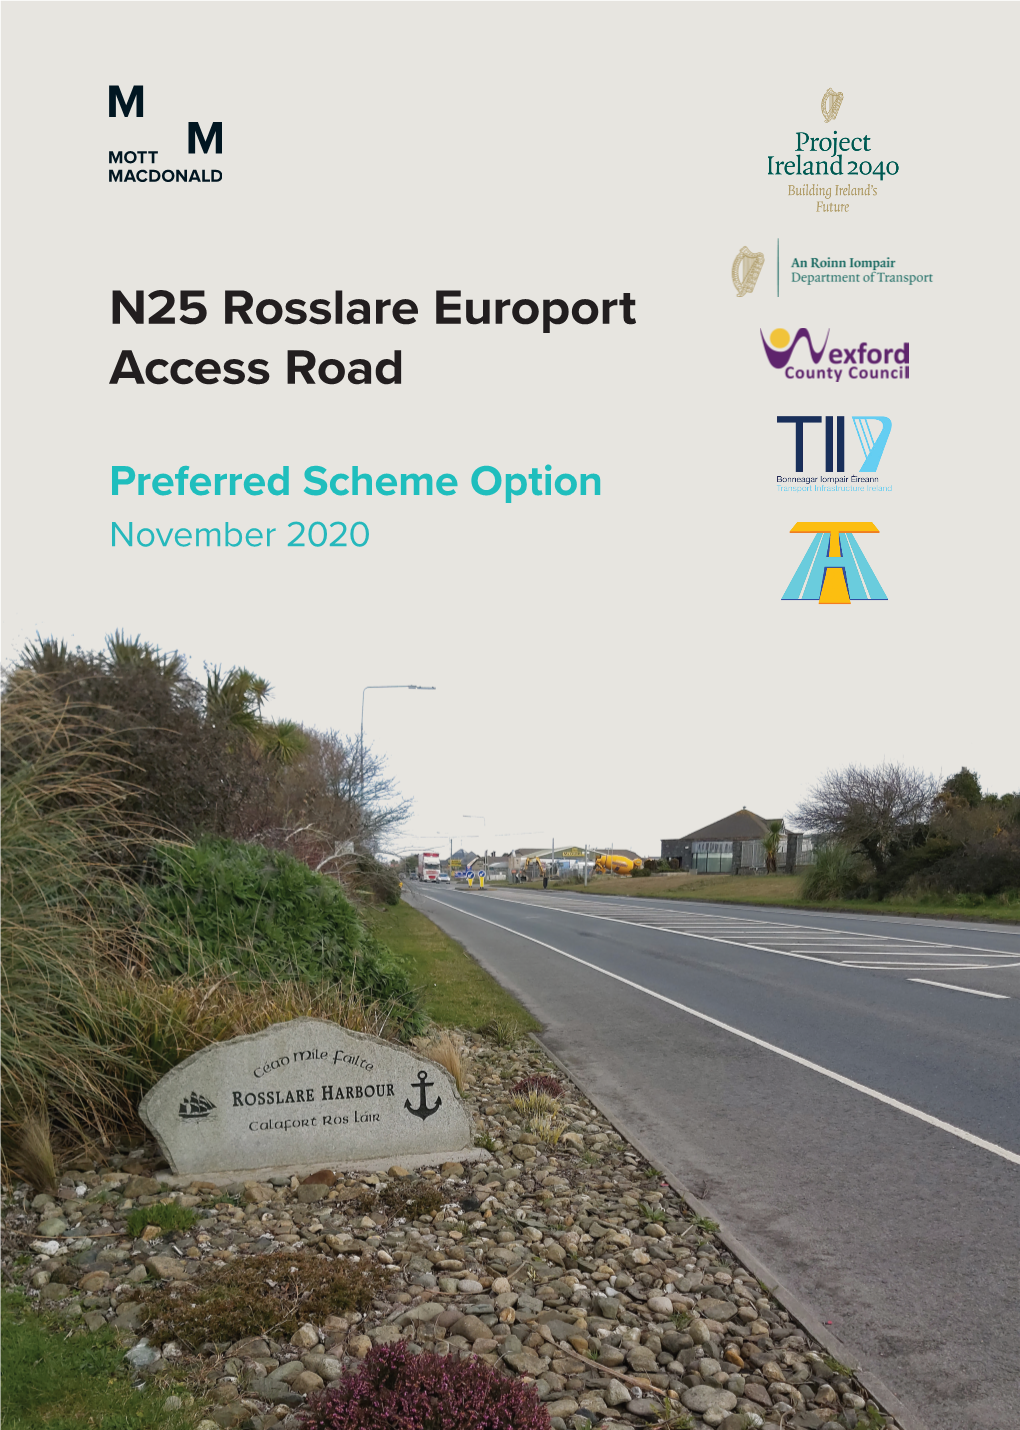 N25 Rosslare Europort Access Road